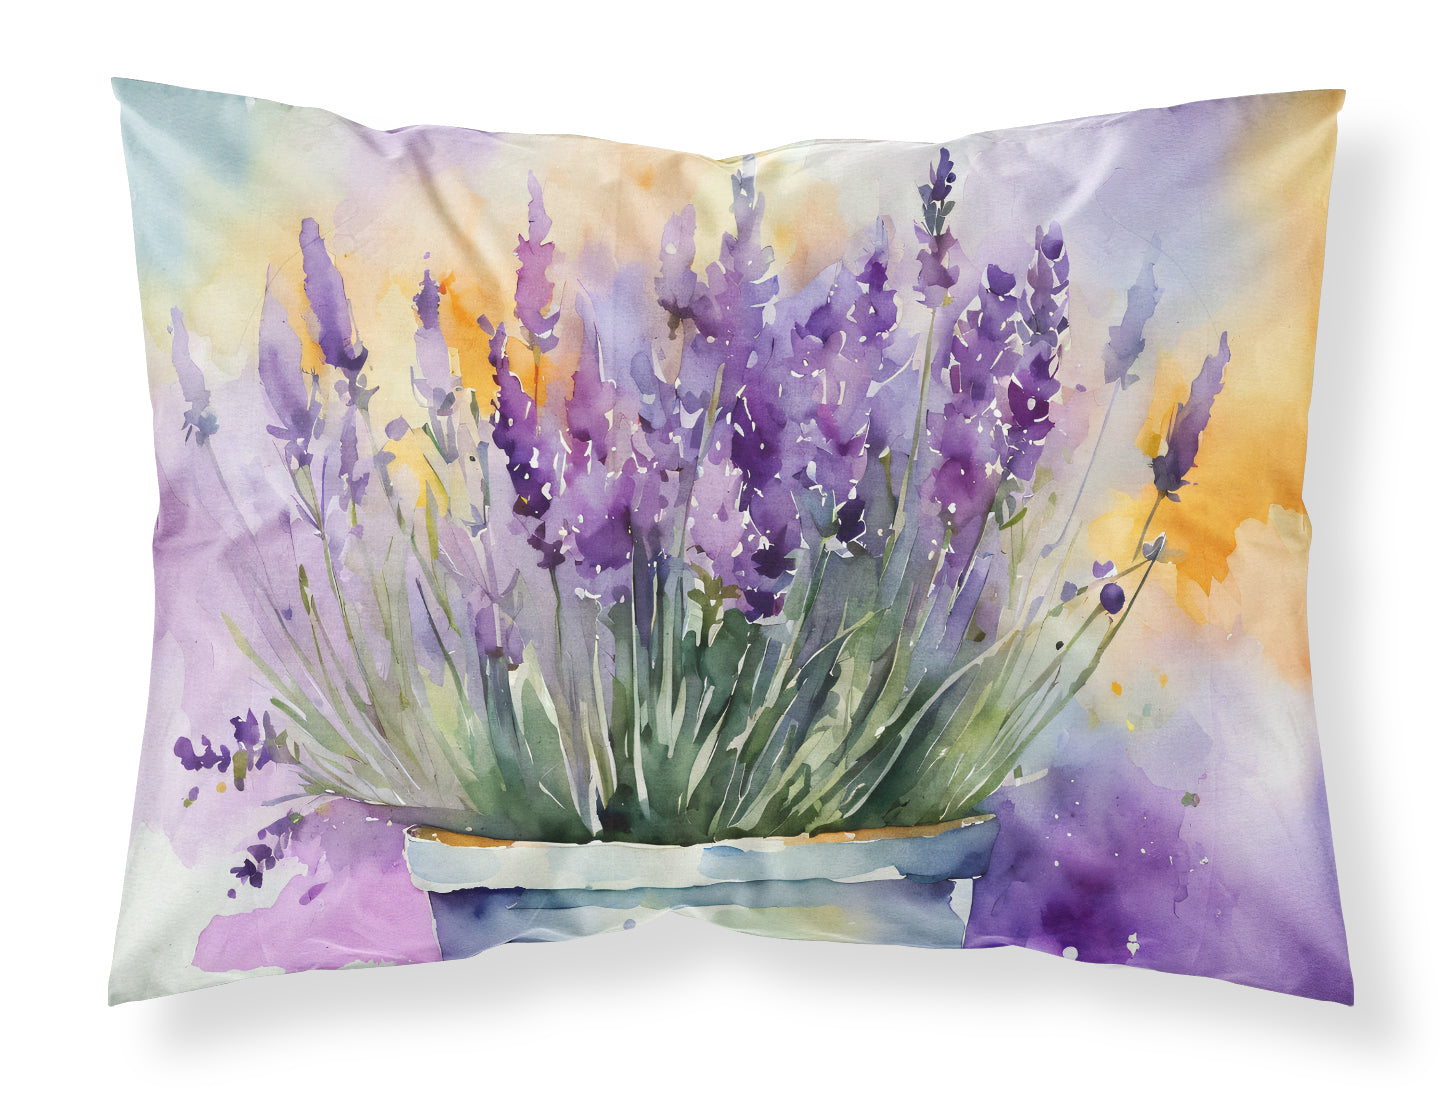 Buy this Lavender in Watercolor Fabric Standard Pillowcase